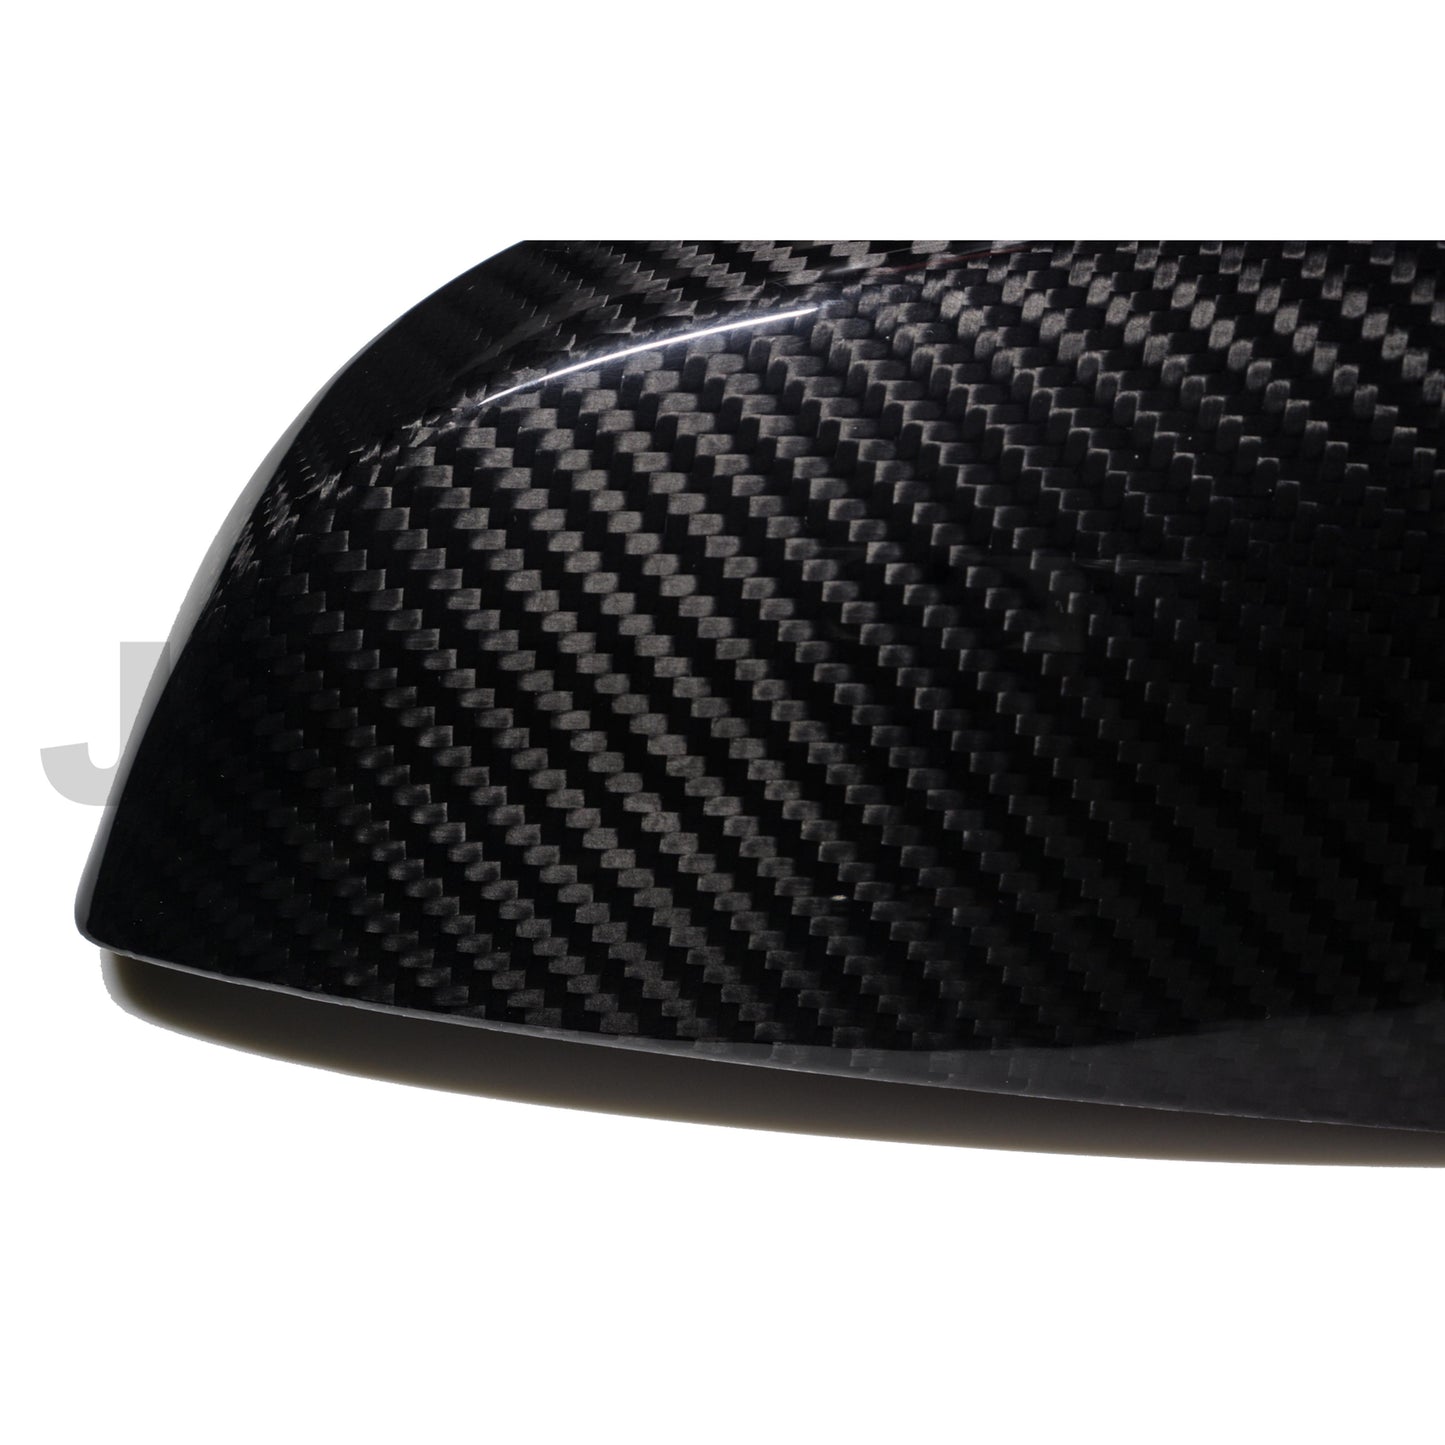 JDMuscle Tanso Carbon Fiber Side Mirror Covers with Turn Signal - 2015+WRX/STI-Aftermarket Mirrors-JDMuscle-JDMuscle